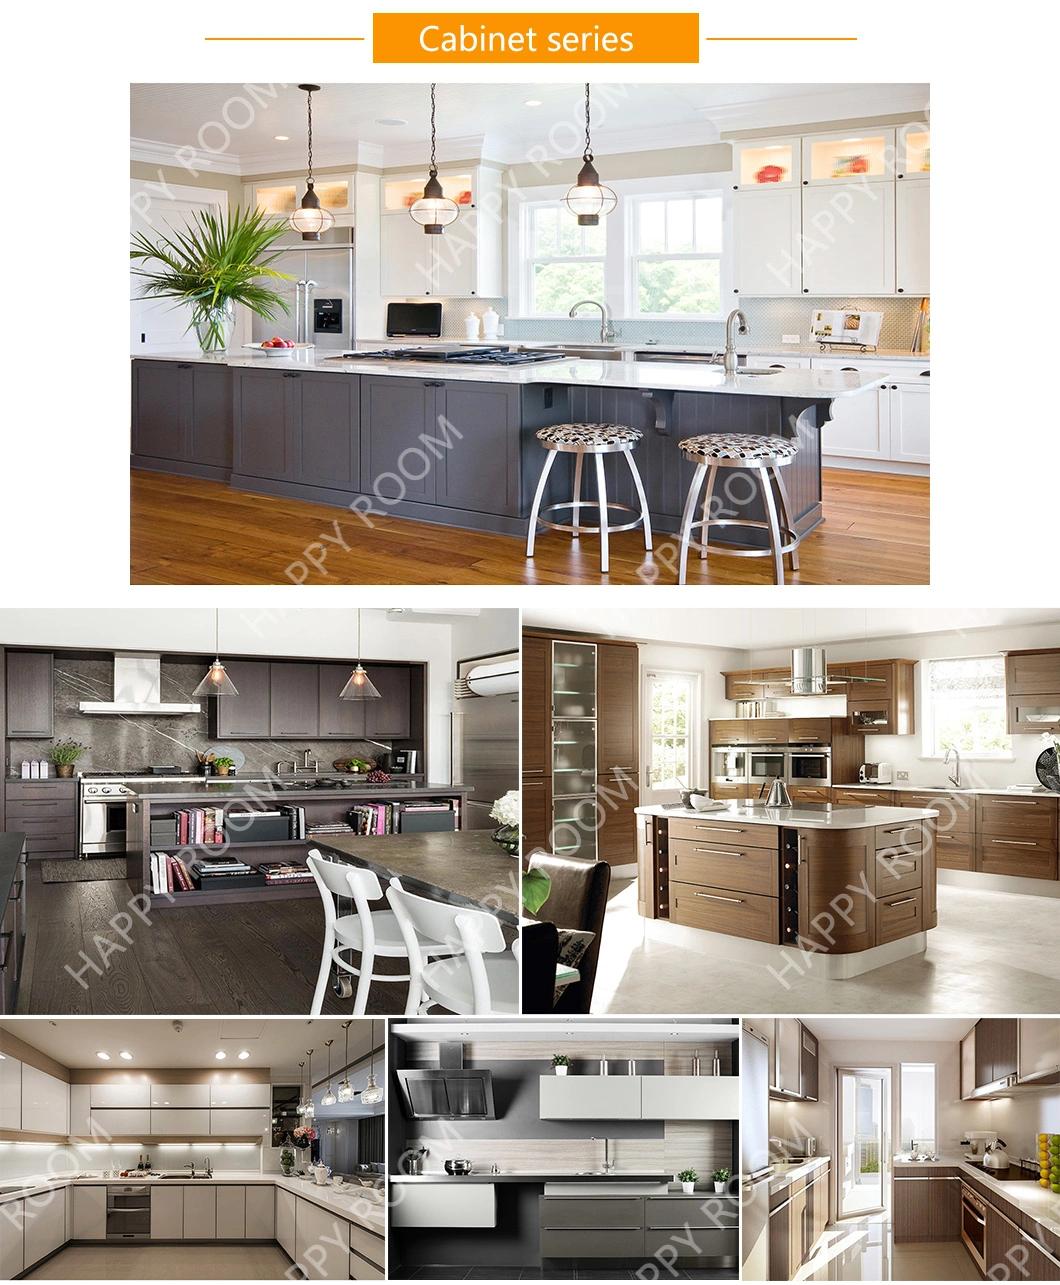 Modern Affordable Style Aluminium Aluminum Wooden Grain Kitchen and Durable Furniture Various Design Kitchen Cabinets